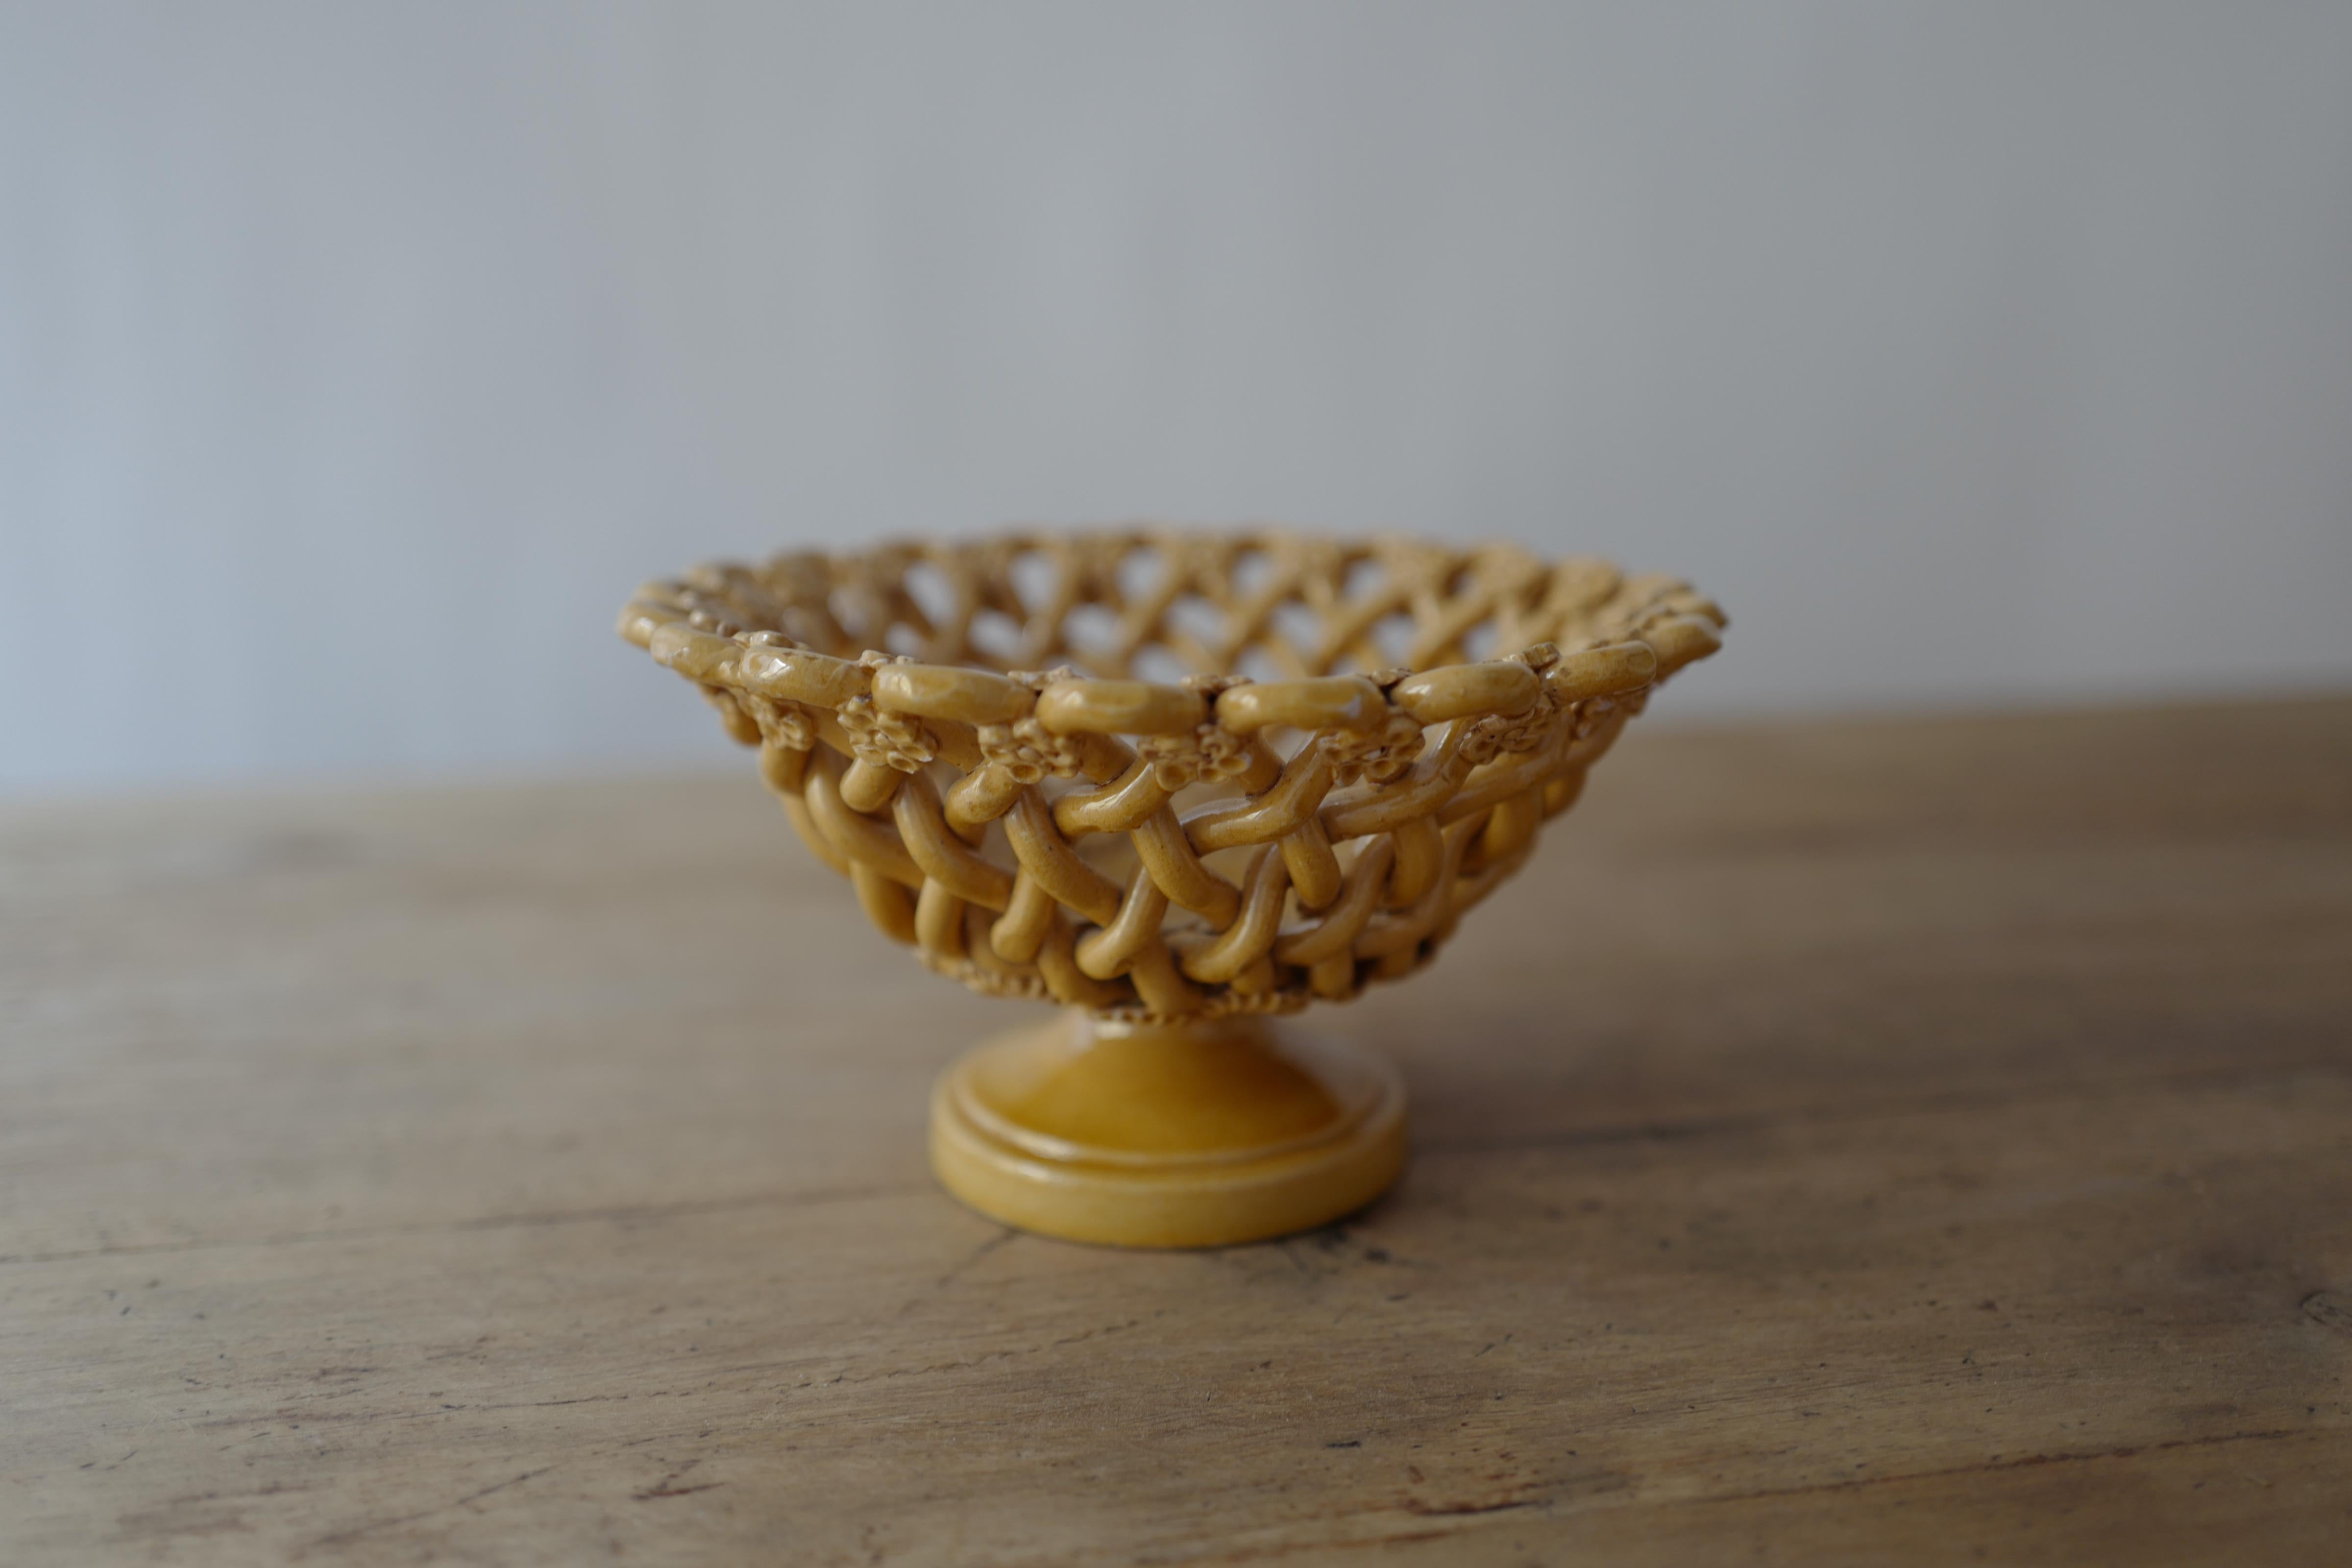 A beautiful midcentury circa 1960's French faience woven ceramic fruit bowl by Pichon a Uzes in an earthy yellow hue. Handcrafted with braided design typical of ceramic artist Pichon’s work executed in mixed earth clays. Signed. The Pichon family